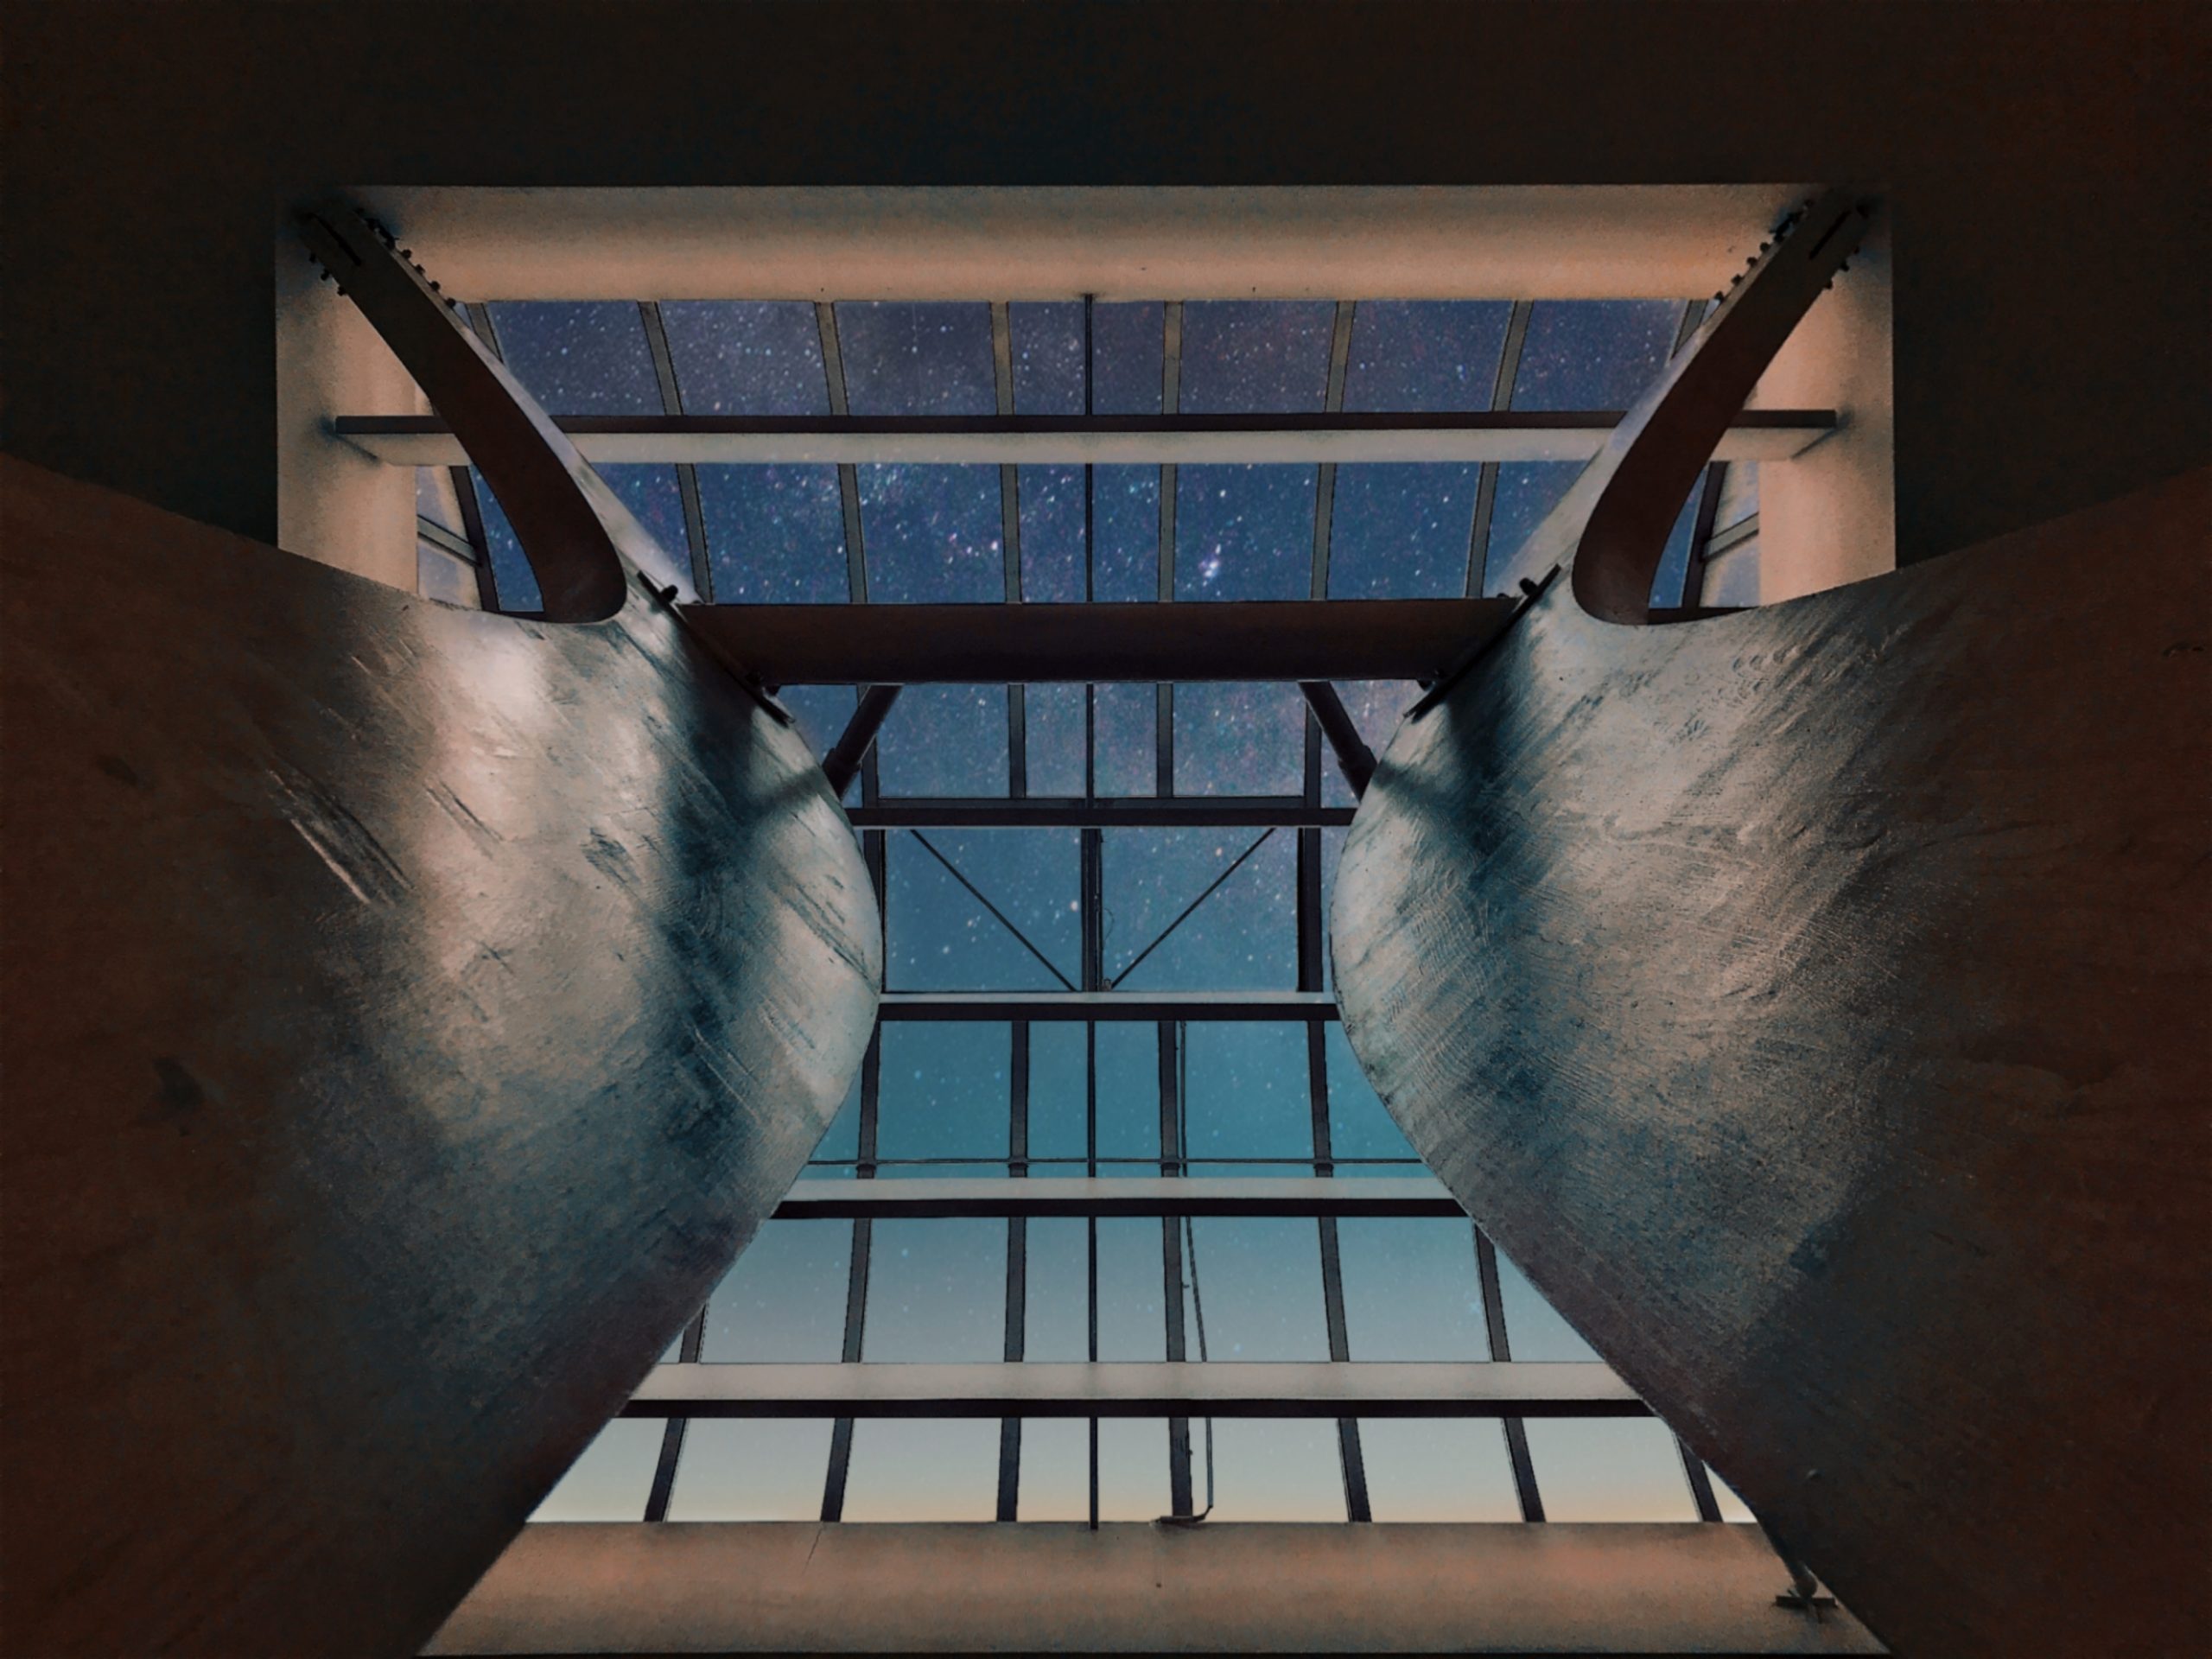 The judges’ favourite is “My own little cosmos within reach” by Pati John, showing the night sky from inside a shopping mall